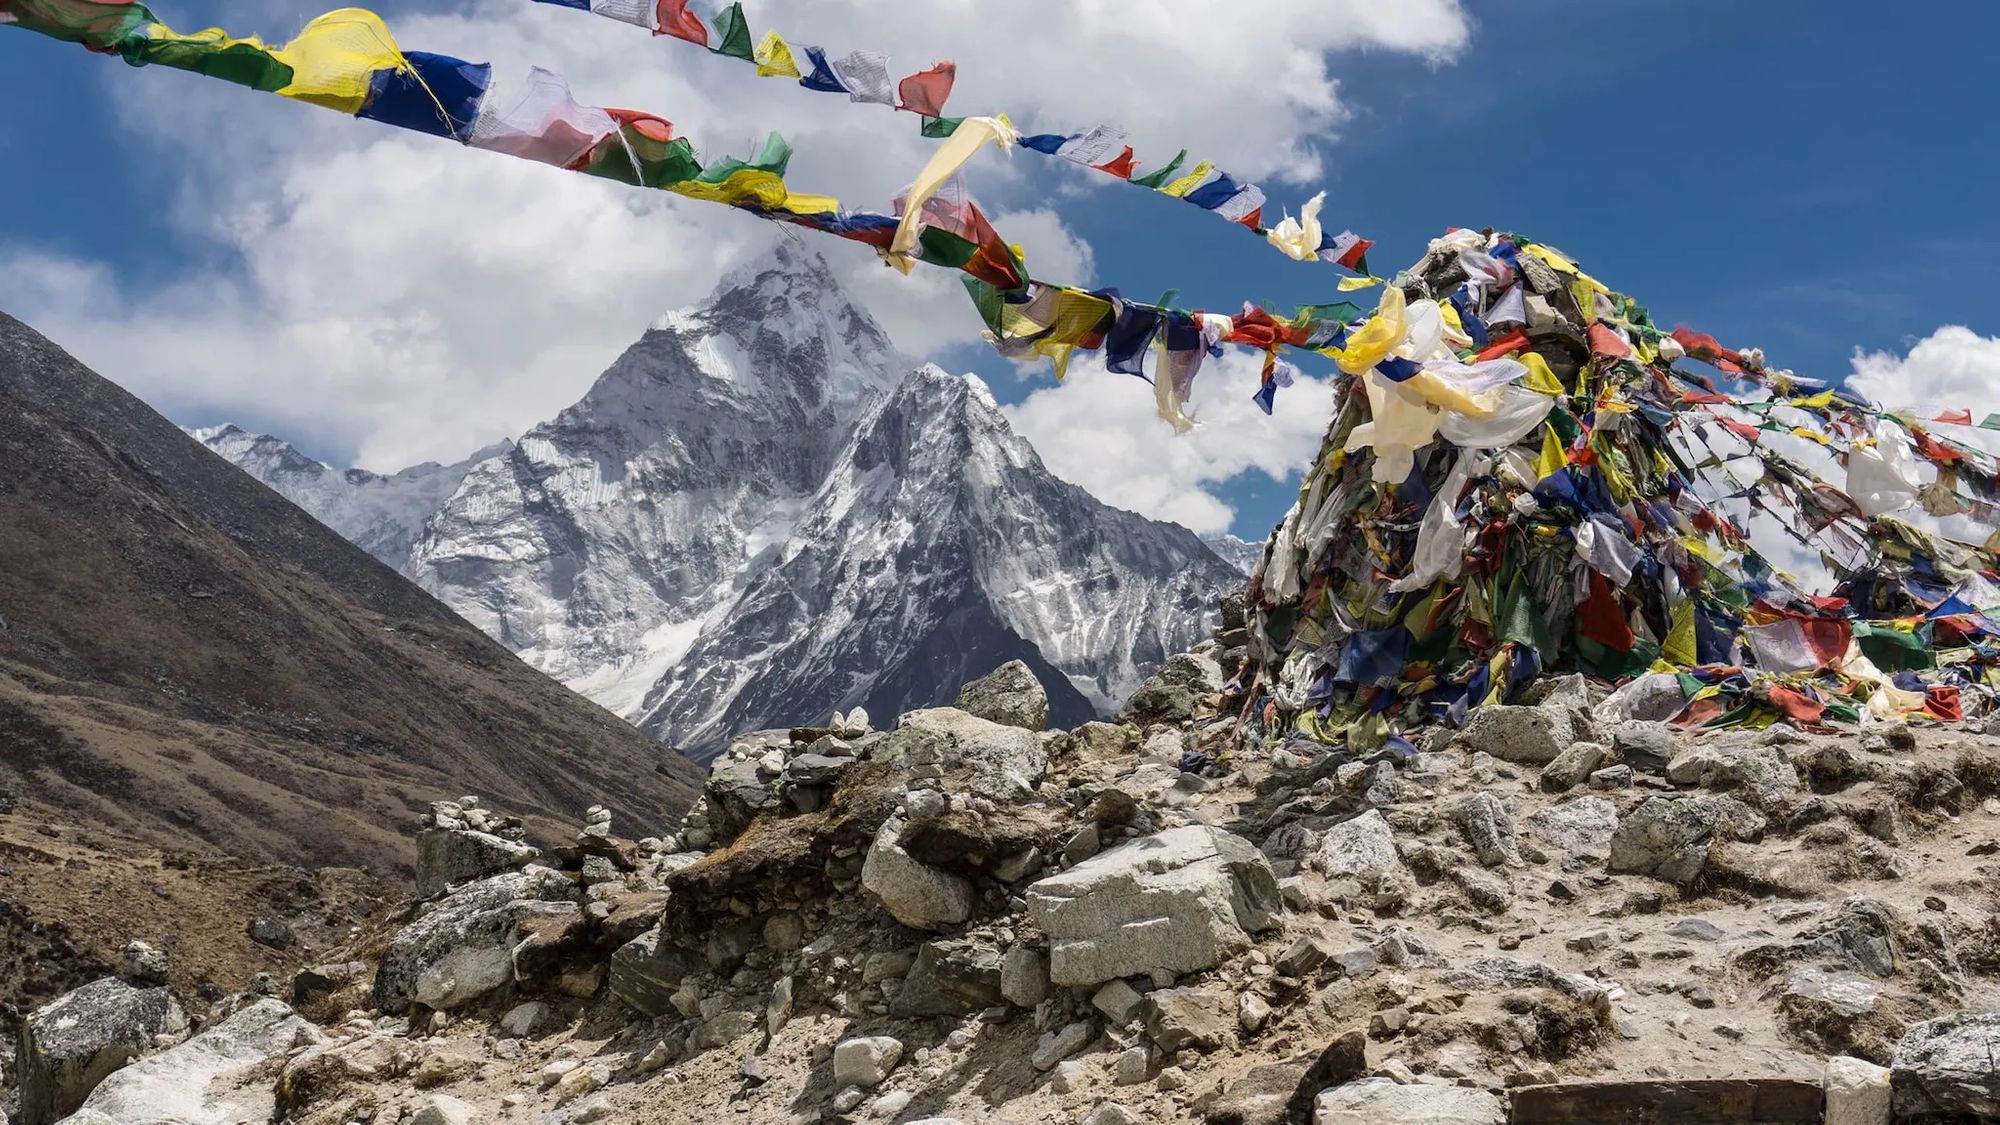 A view of Mount Everest with prayer flags in the foreground.